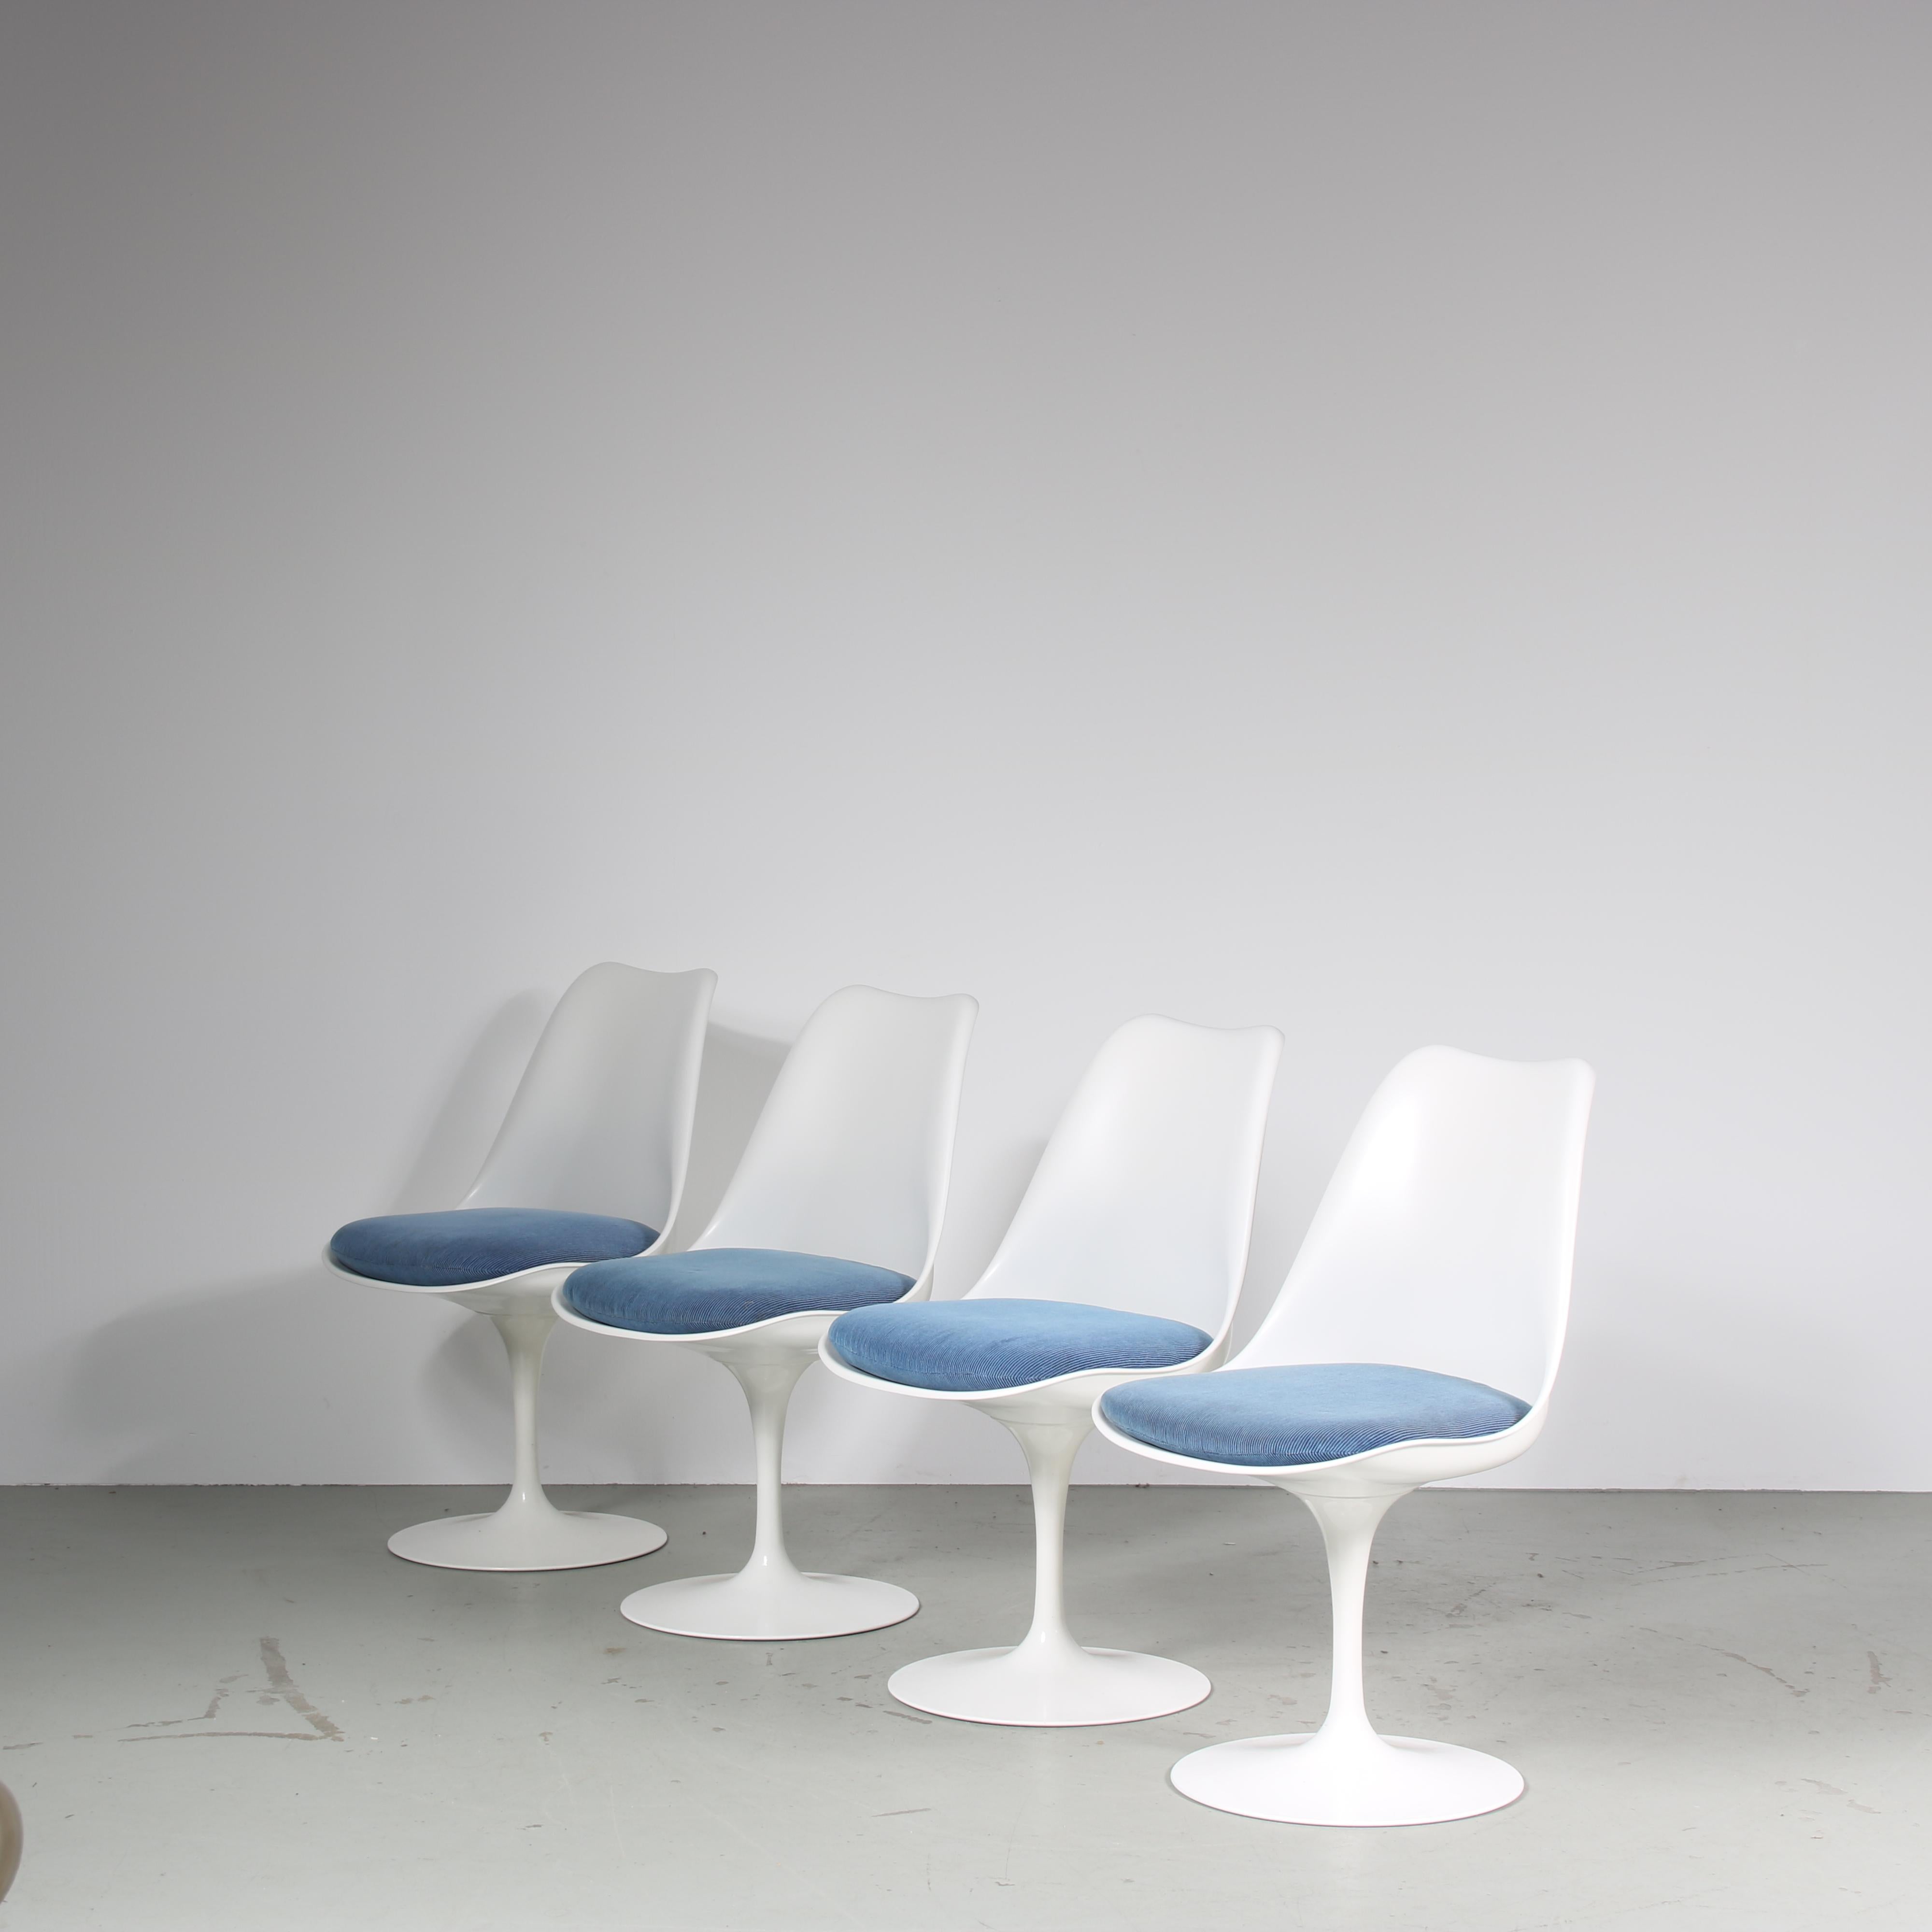 This set of four dining chairs is a true icon of mid-century modern design, designed by Eero Saarinen and manufactured by Knoll International in the United States around 1960.

The chairs feature a sleek and minimalist tulip base in white aluminum,